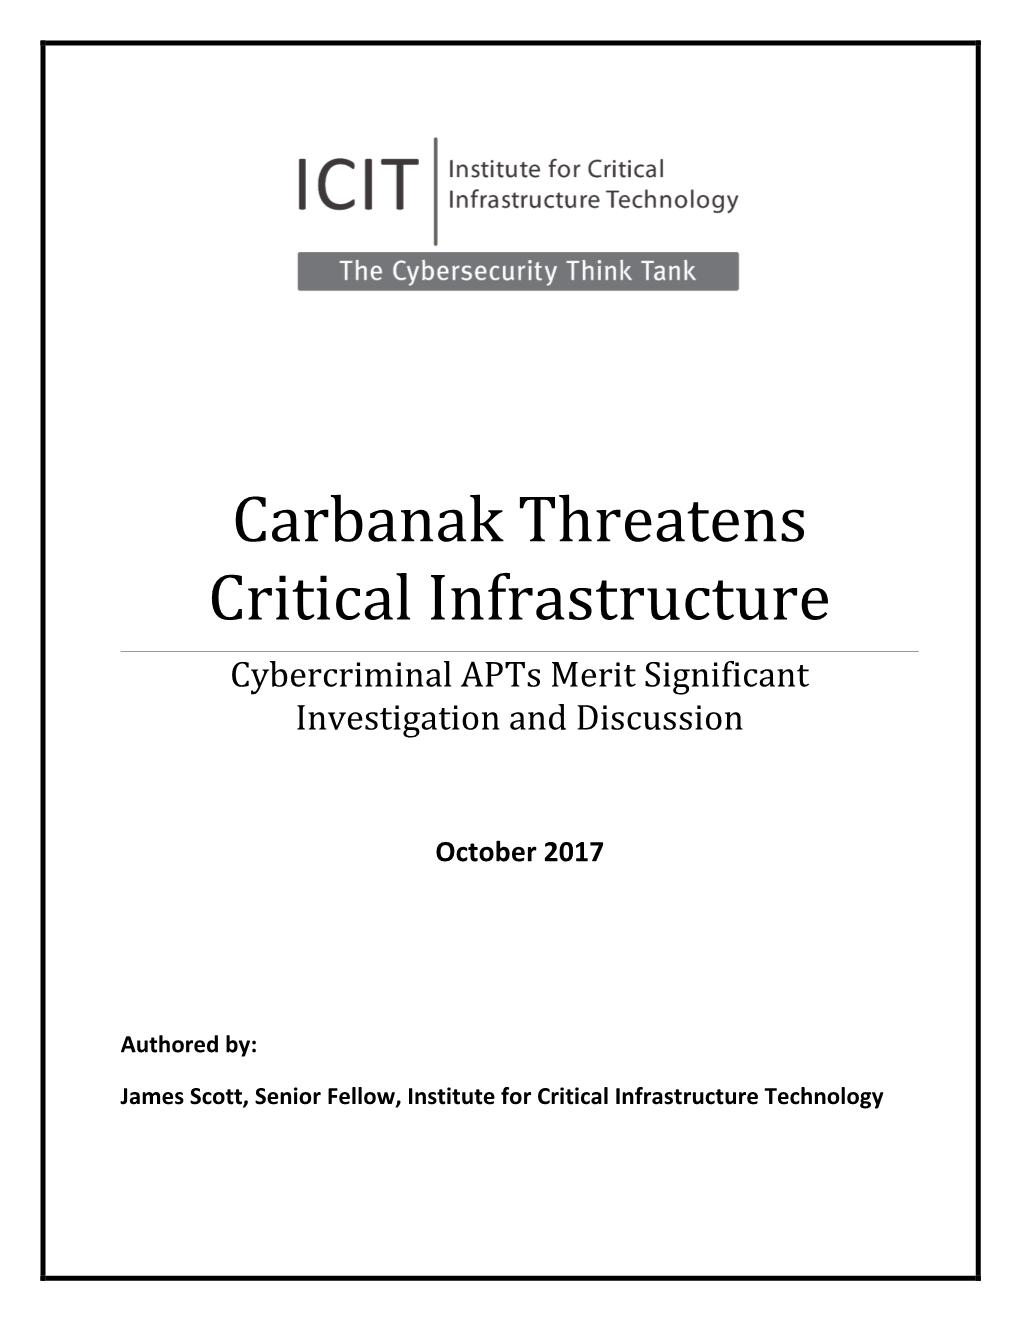 Carbanak Threatens Critical Infrastructure Cybercriminal Apts Merit Significant Investigation and Discussion